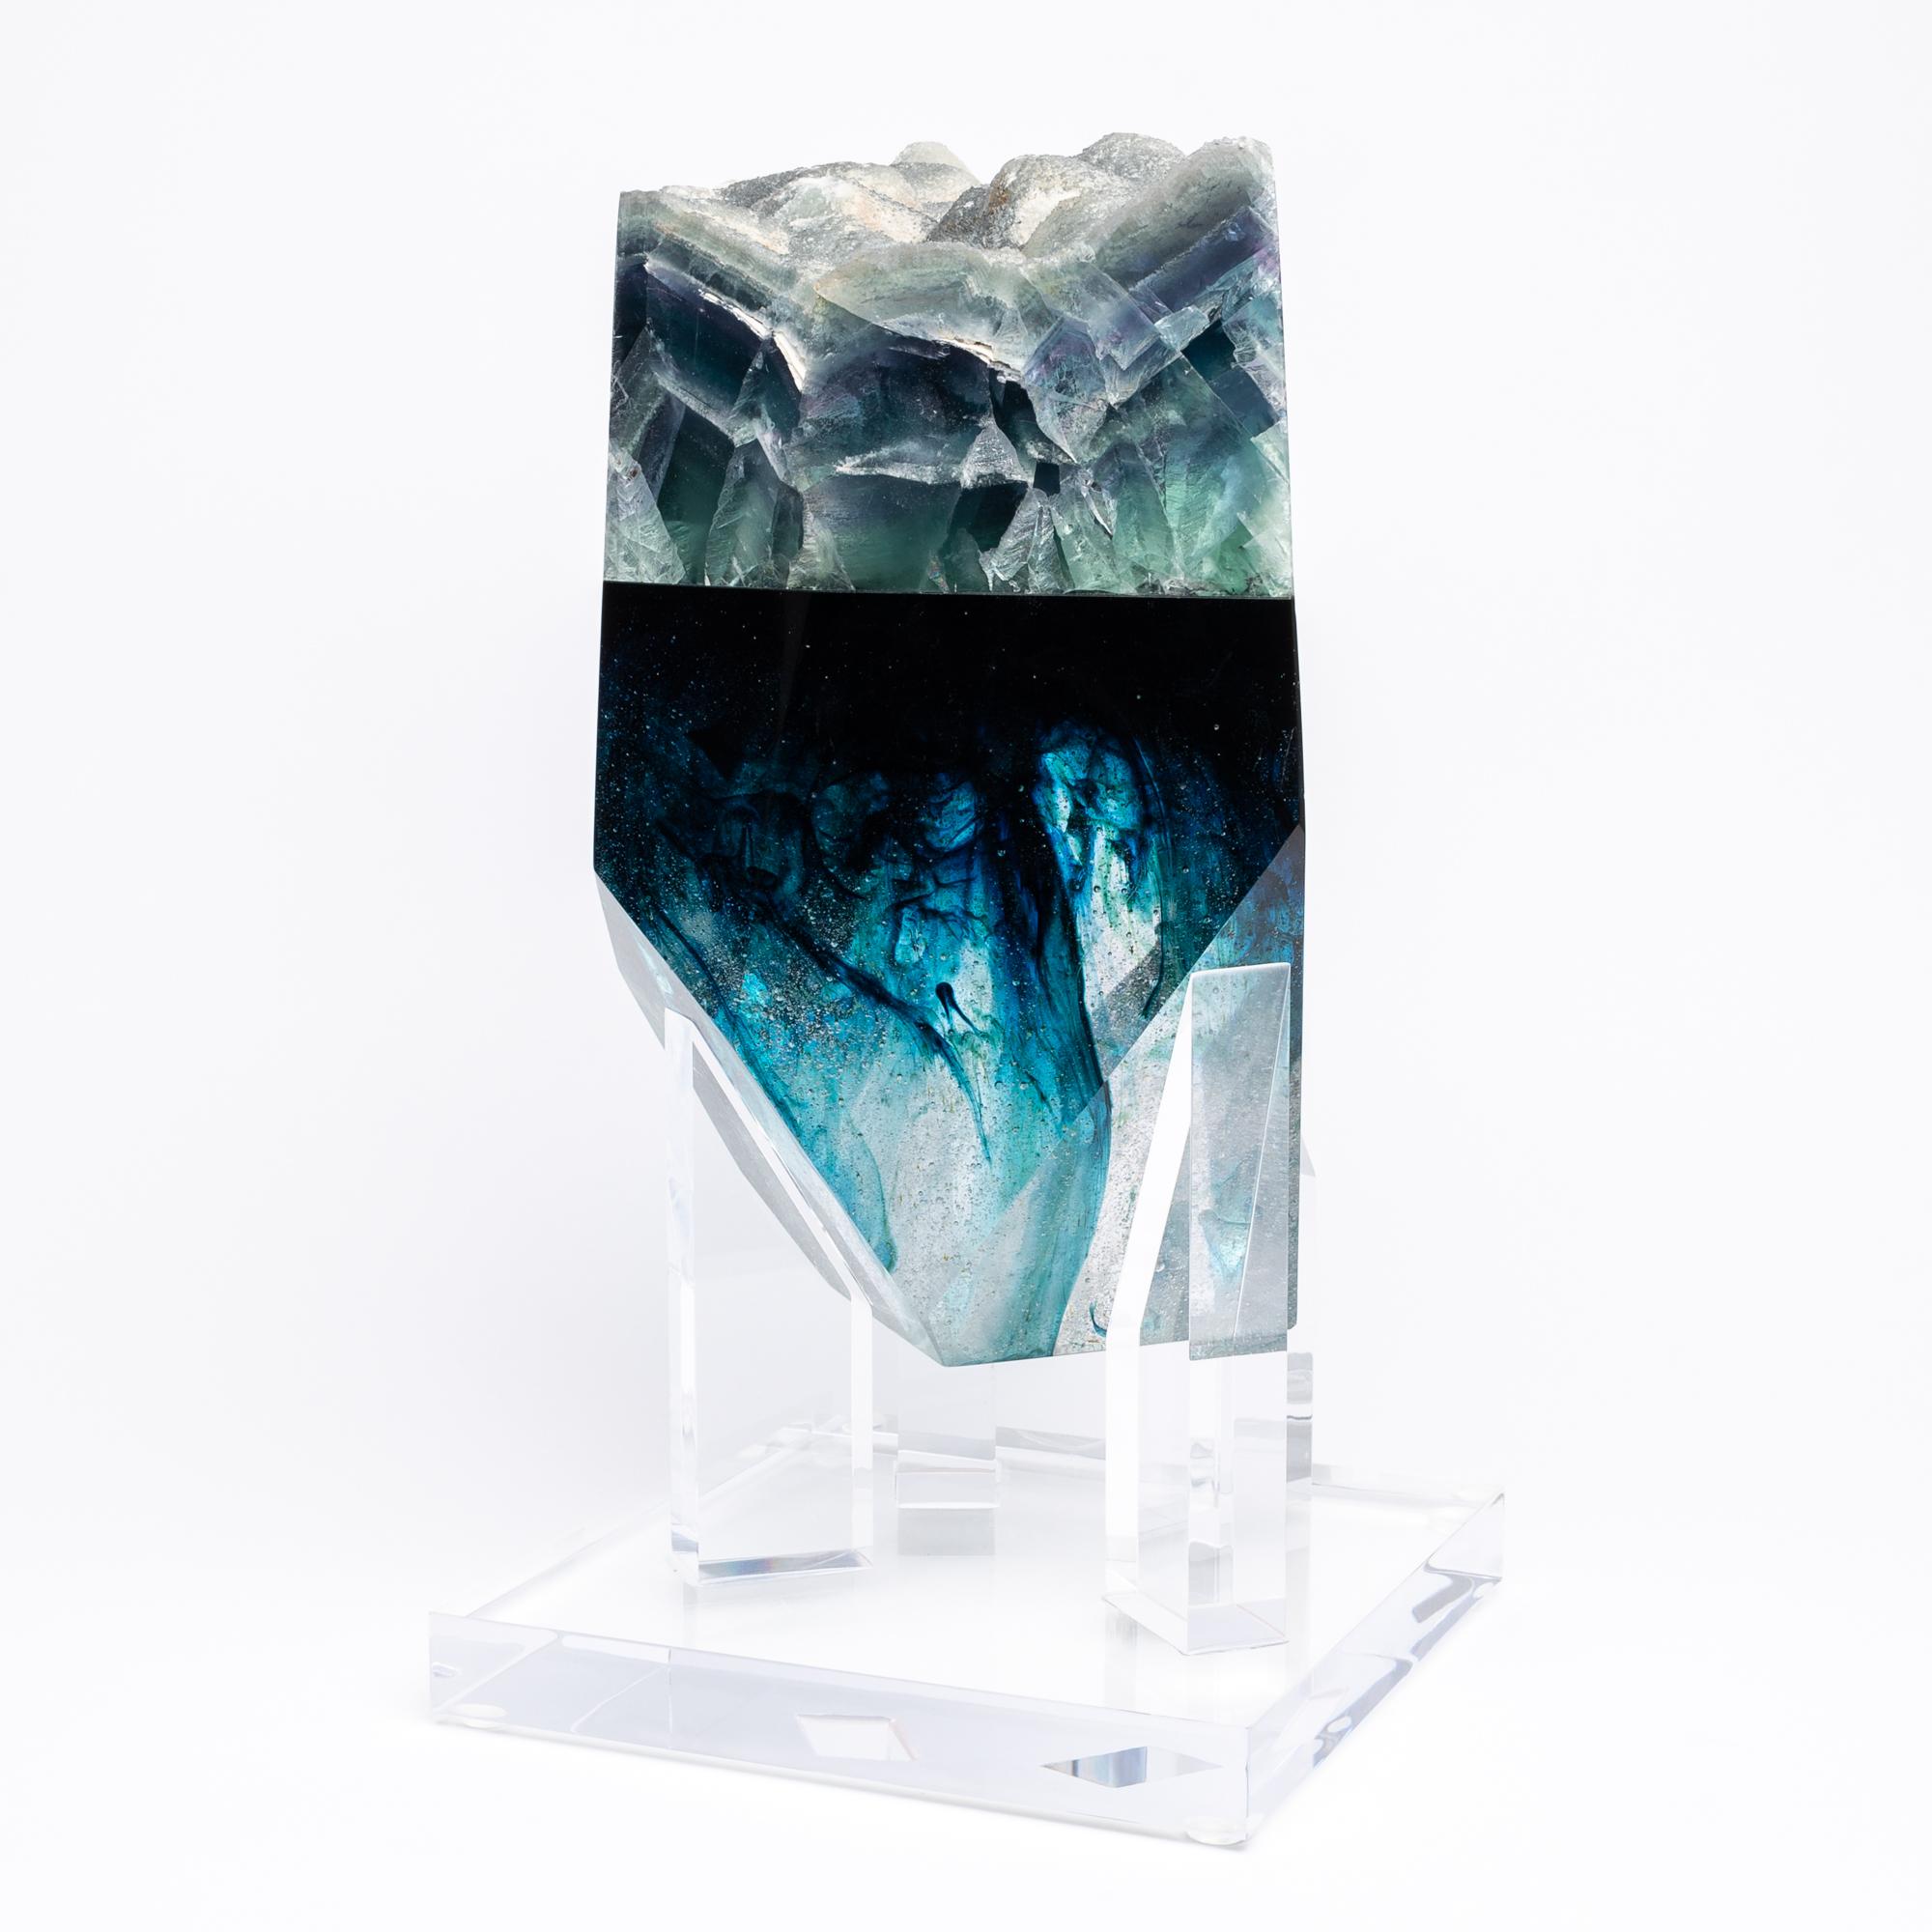 Mexican Iridescent Fluorite and Deep Blue Hues Faceted Glass Fusion Sculpture